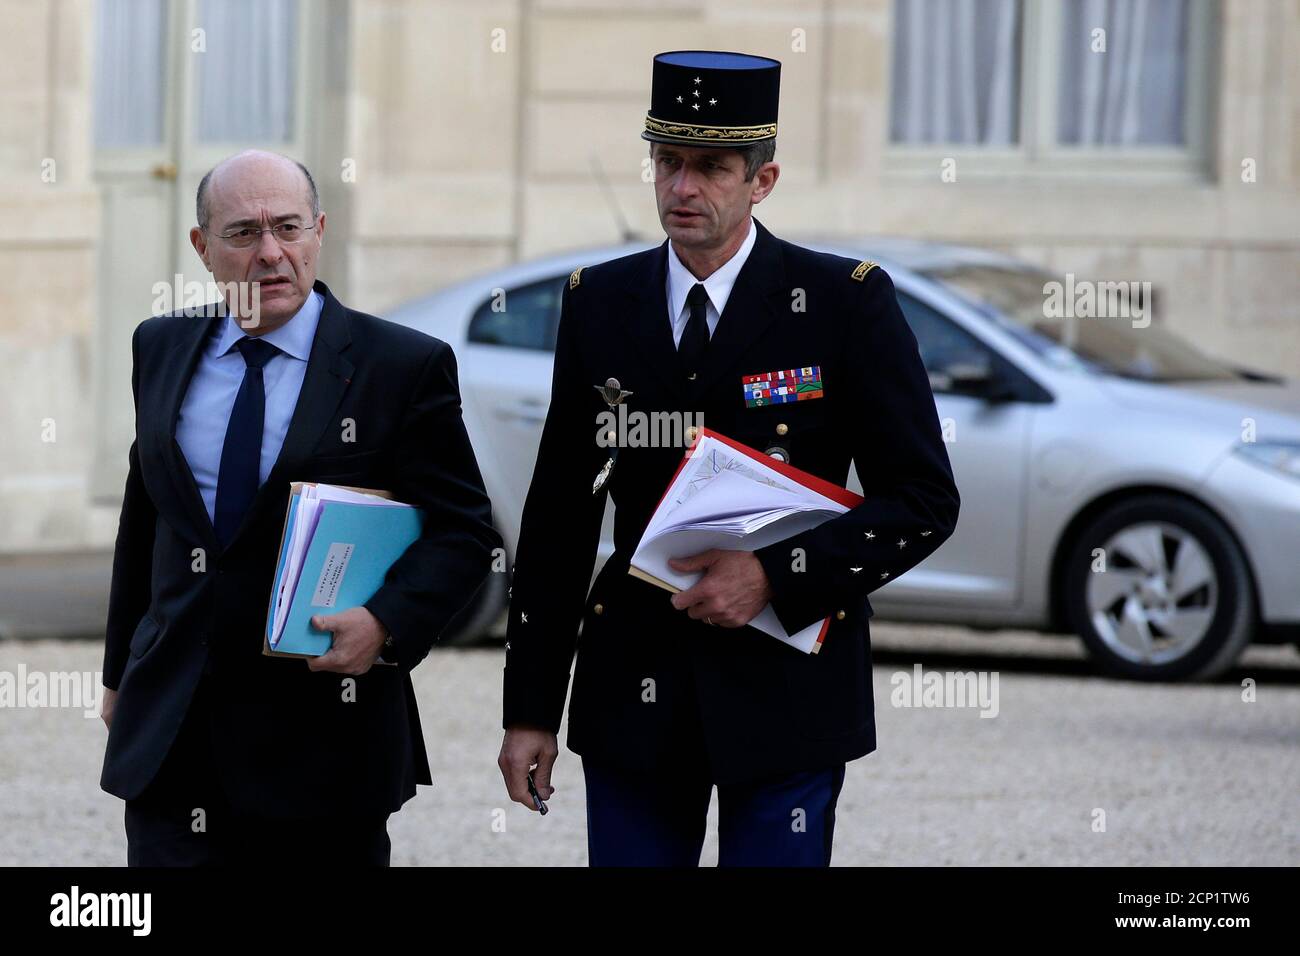 French National Police Director Jean-Marc Falcone (DGPN) (L) and National  Gendarmerie Director General Denis Favier (DGGN) arrive at the Elysee  Palace in Paris, France, November 14, 2015, to attend a Defence  extraordinary